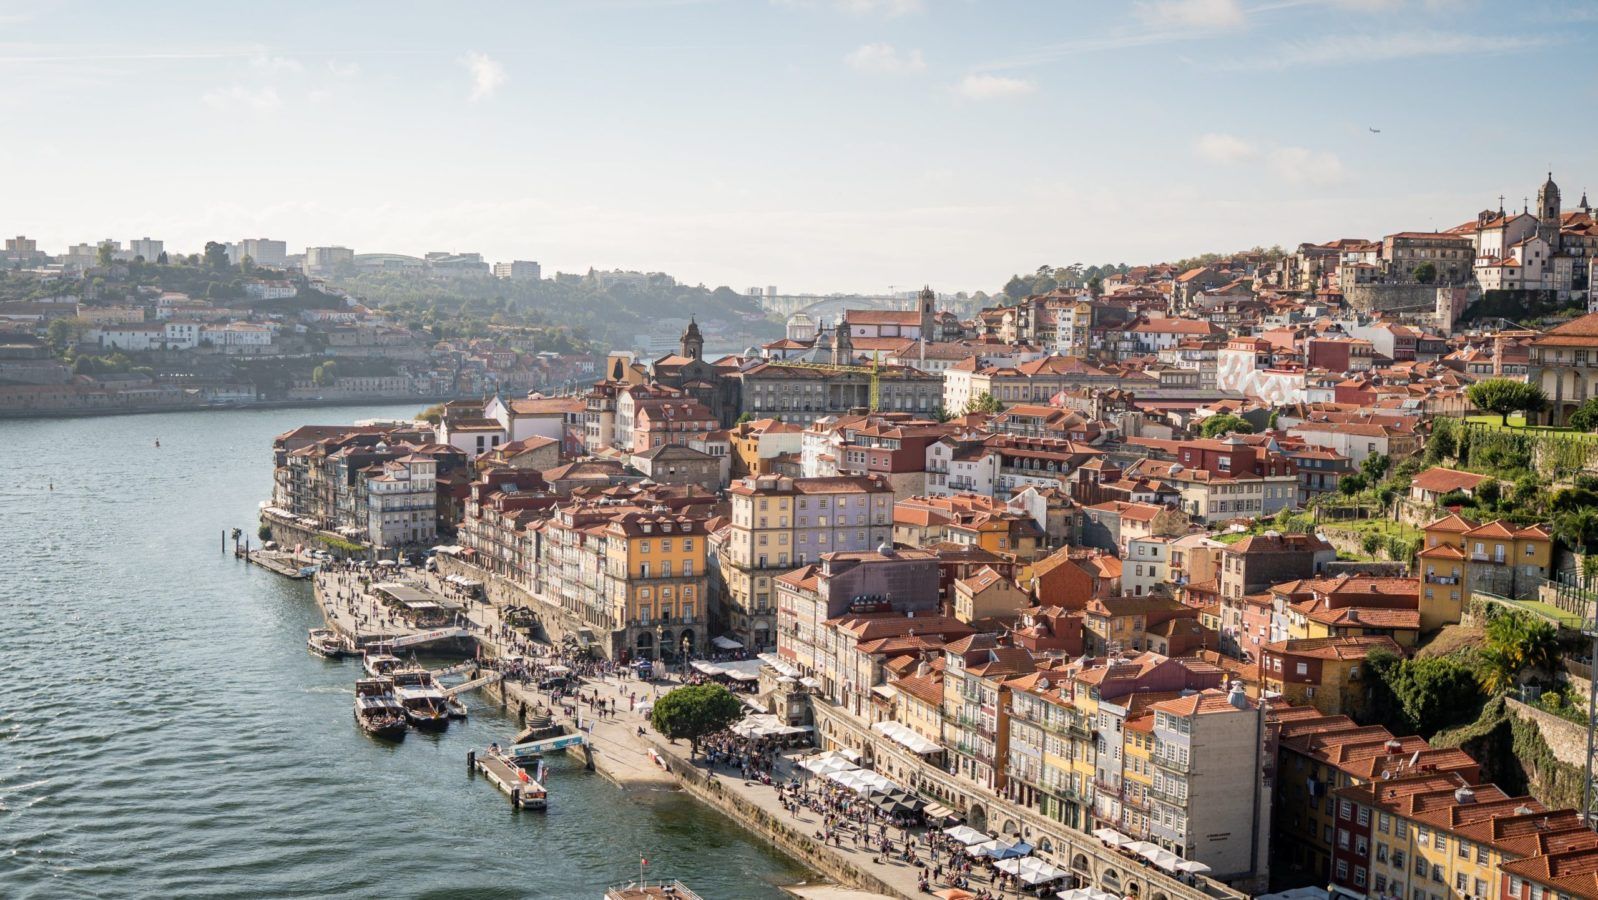 Love wine? Here’s why Porto should be your next holiday destination instead